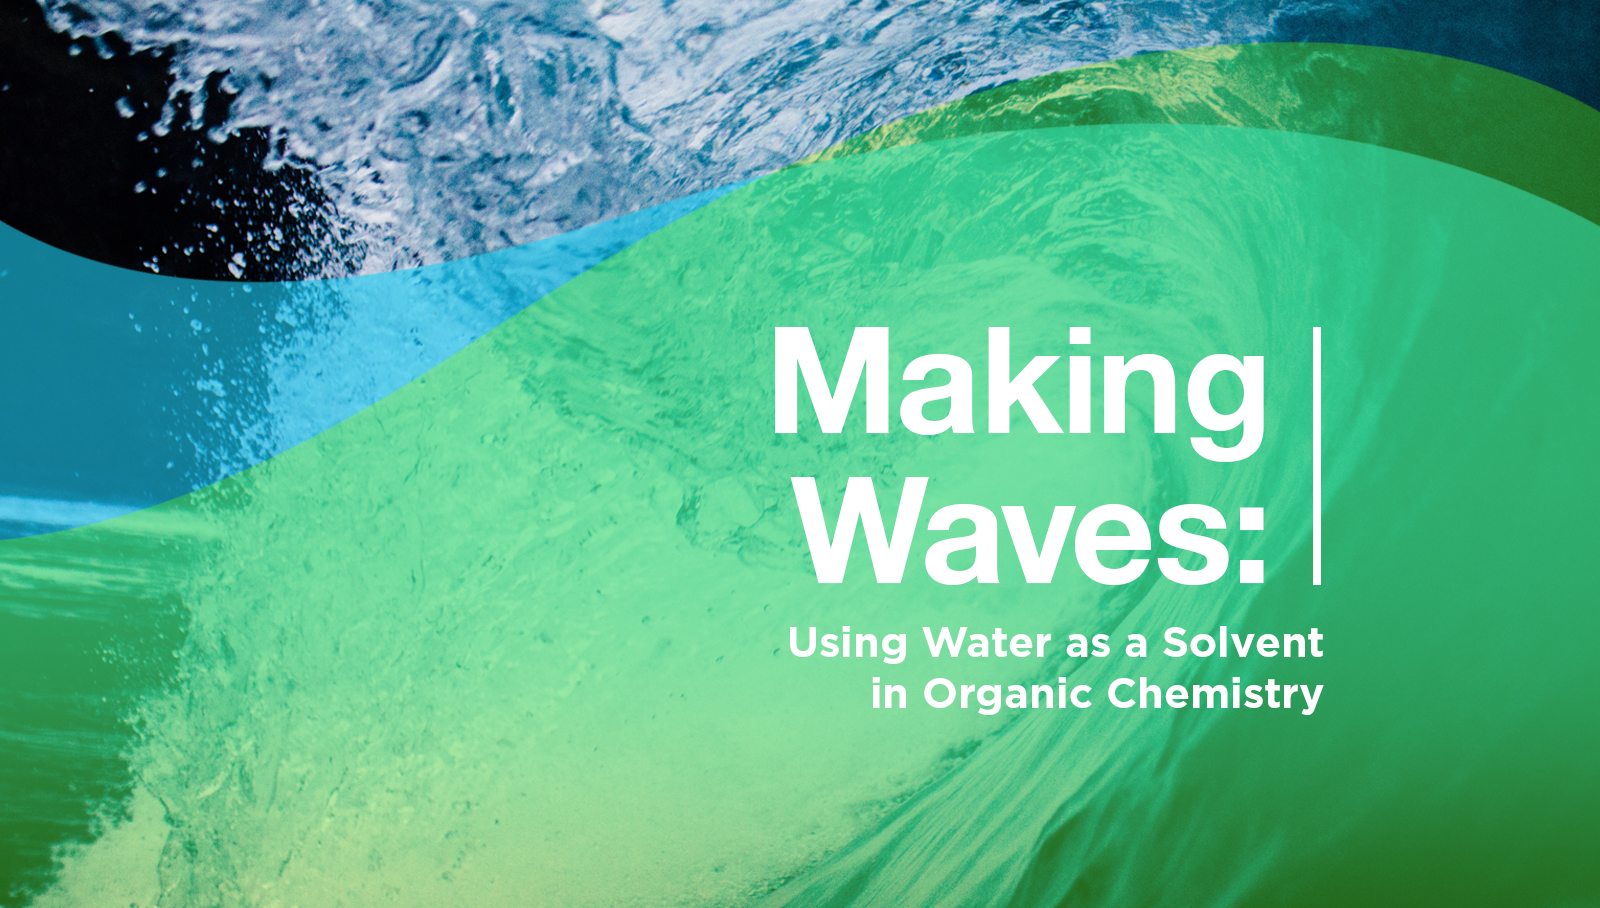 Making Waves: Using Water as a Solvent in Organic Chemistry